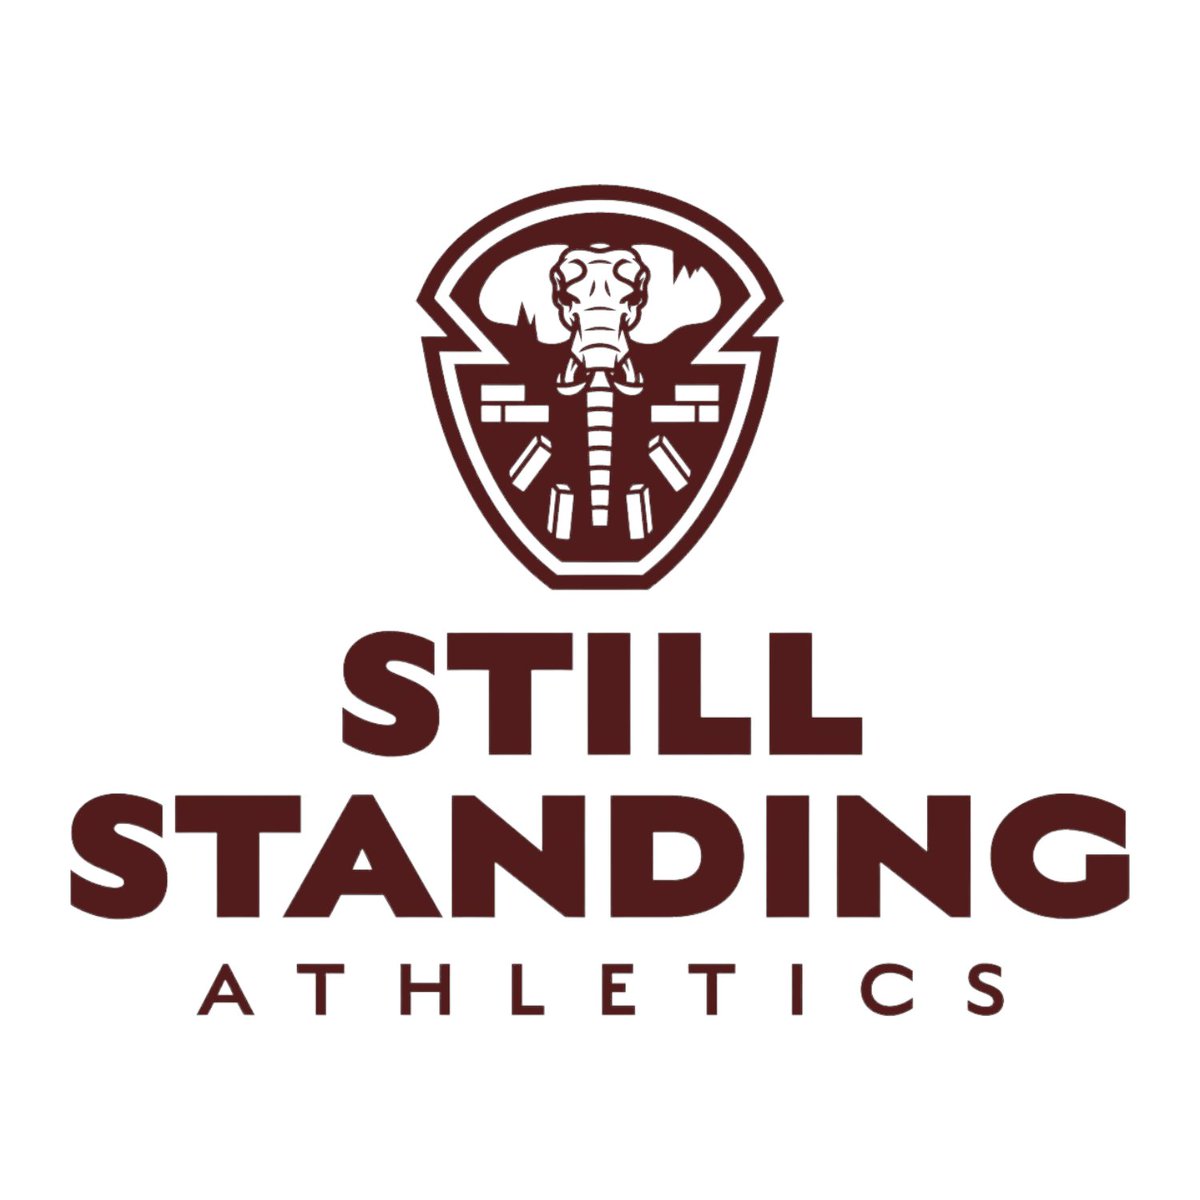 Our line of streetwear is strong, practical, and substantial -- just like you. Compete against your circumstances and fight to build up your potential. You are still standing. #StillStandingAthletics #EverydayWarrior